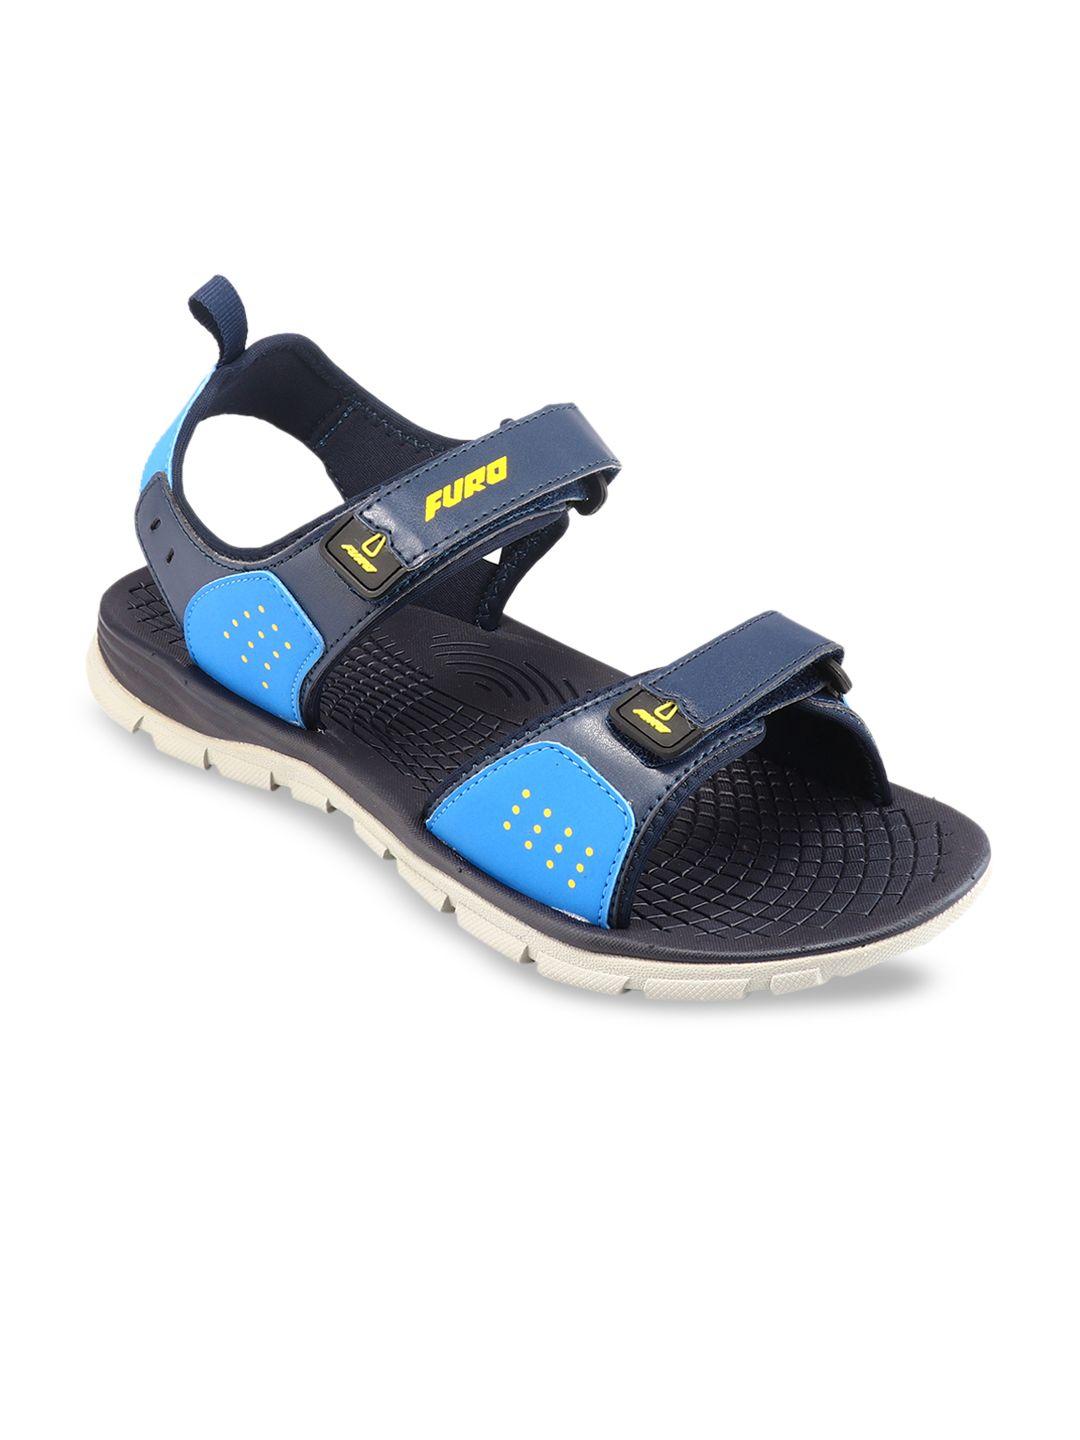 furo-by-red-chief-men-blue-solid-sports-sandals